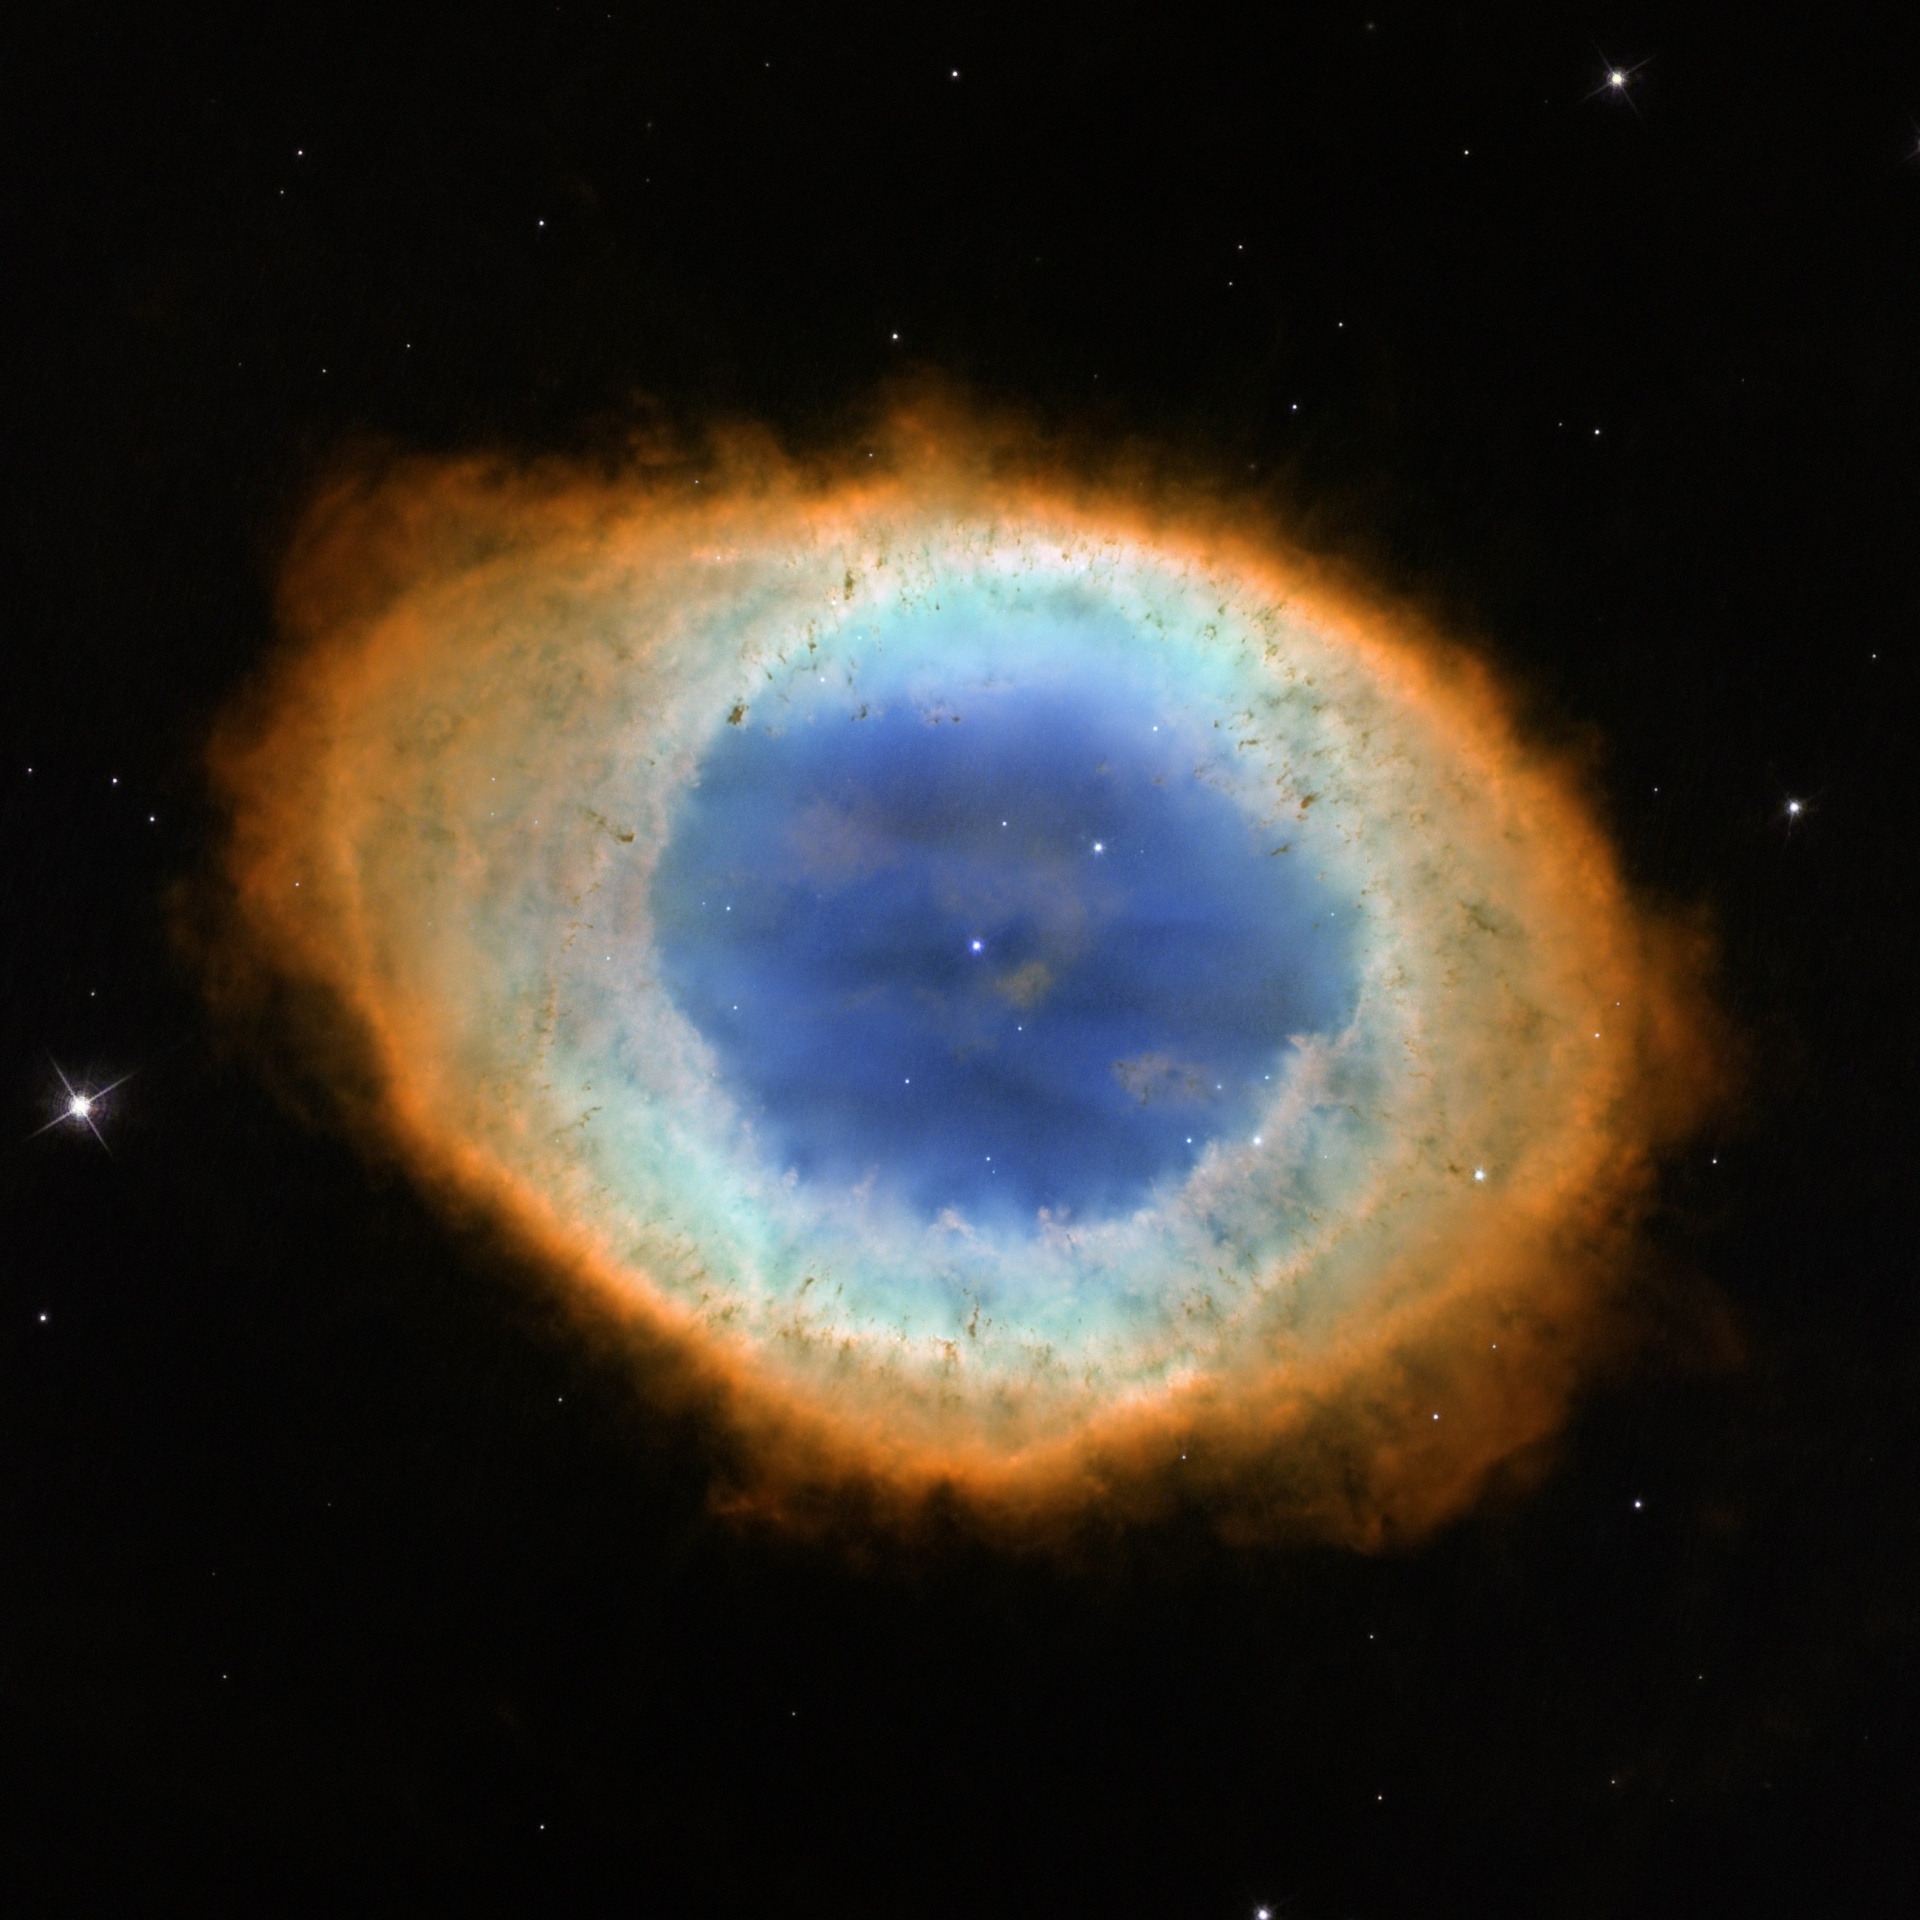 image from Videoastronomie